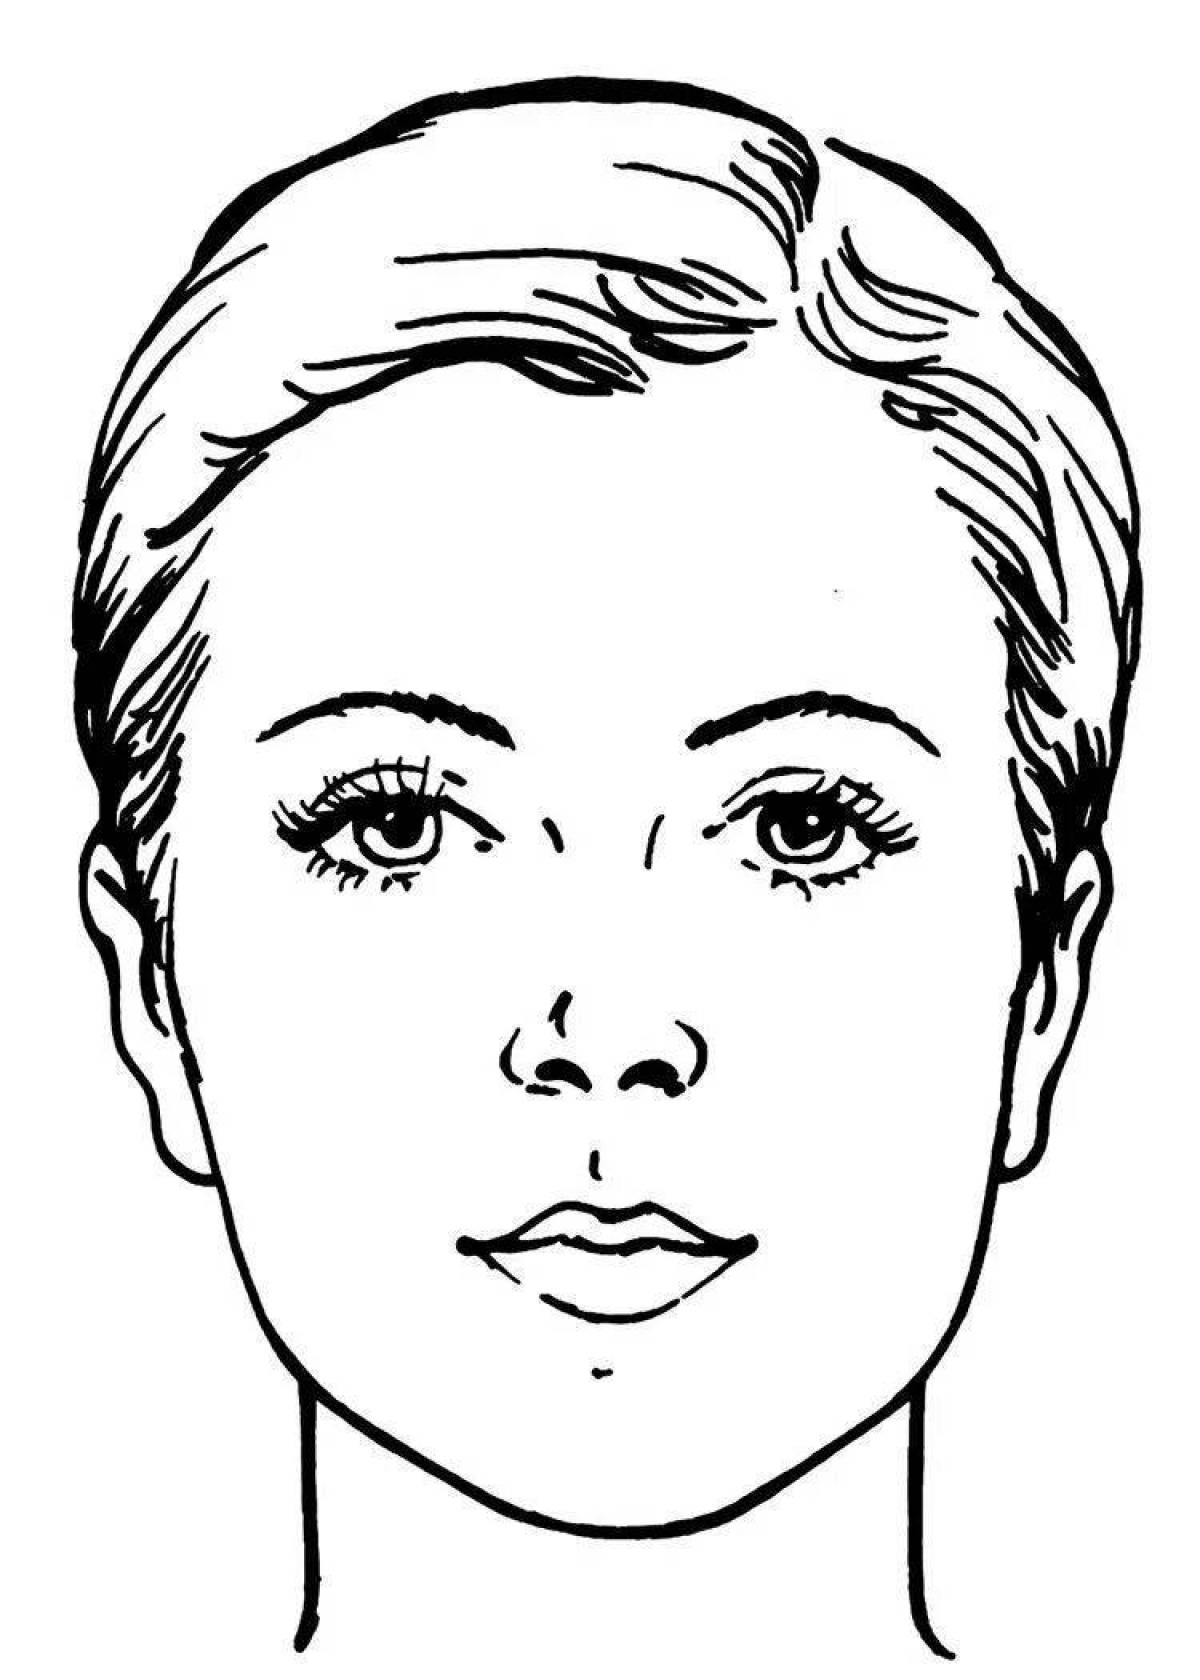 Awesome face coloring page